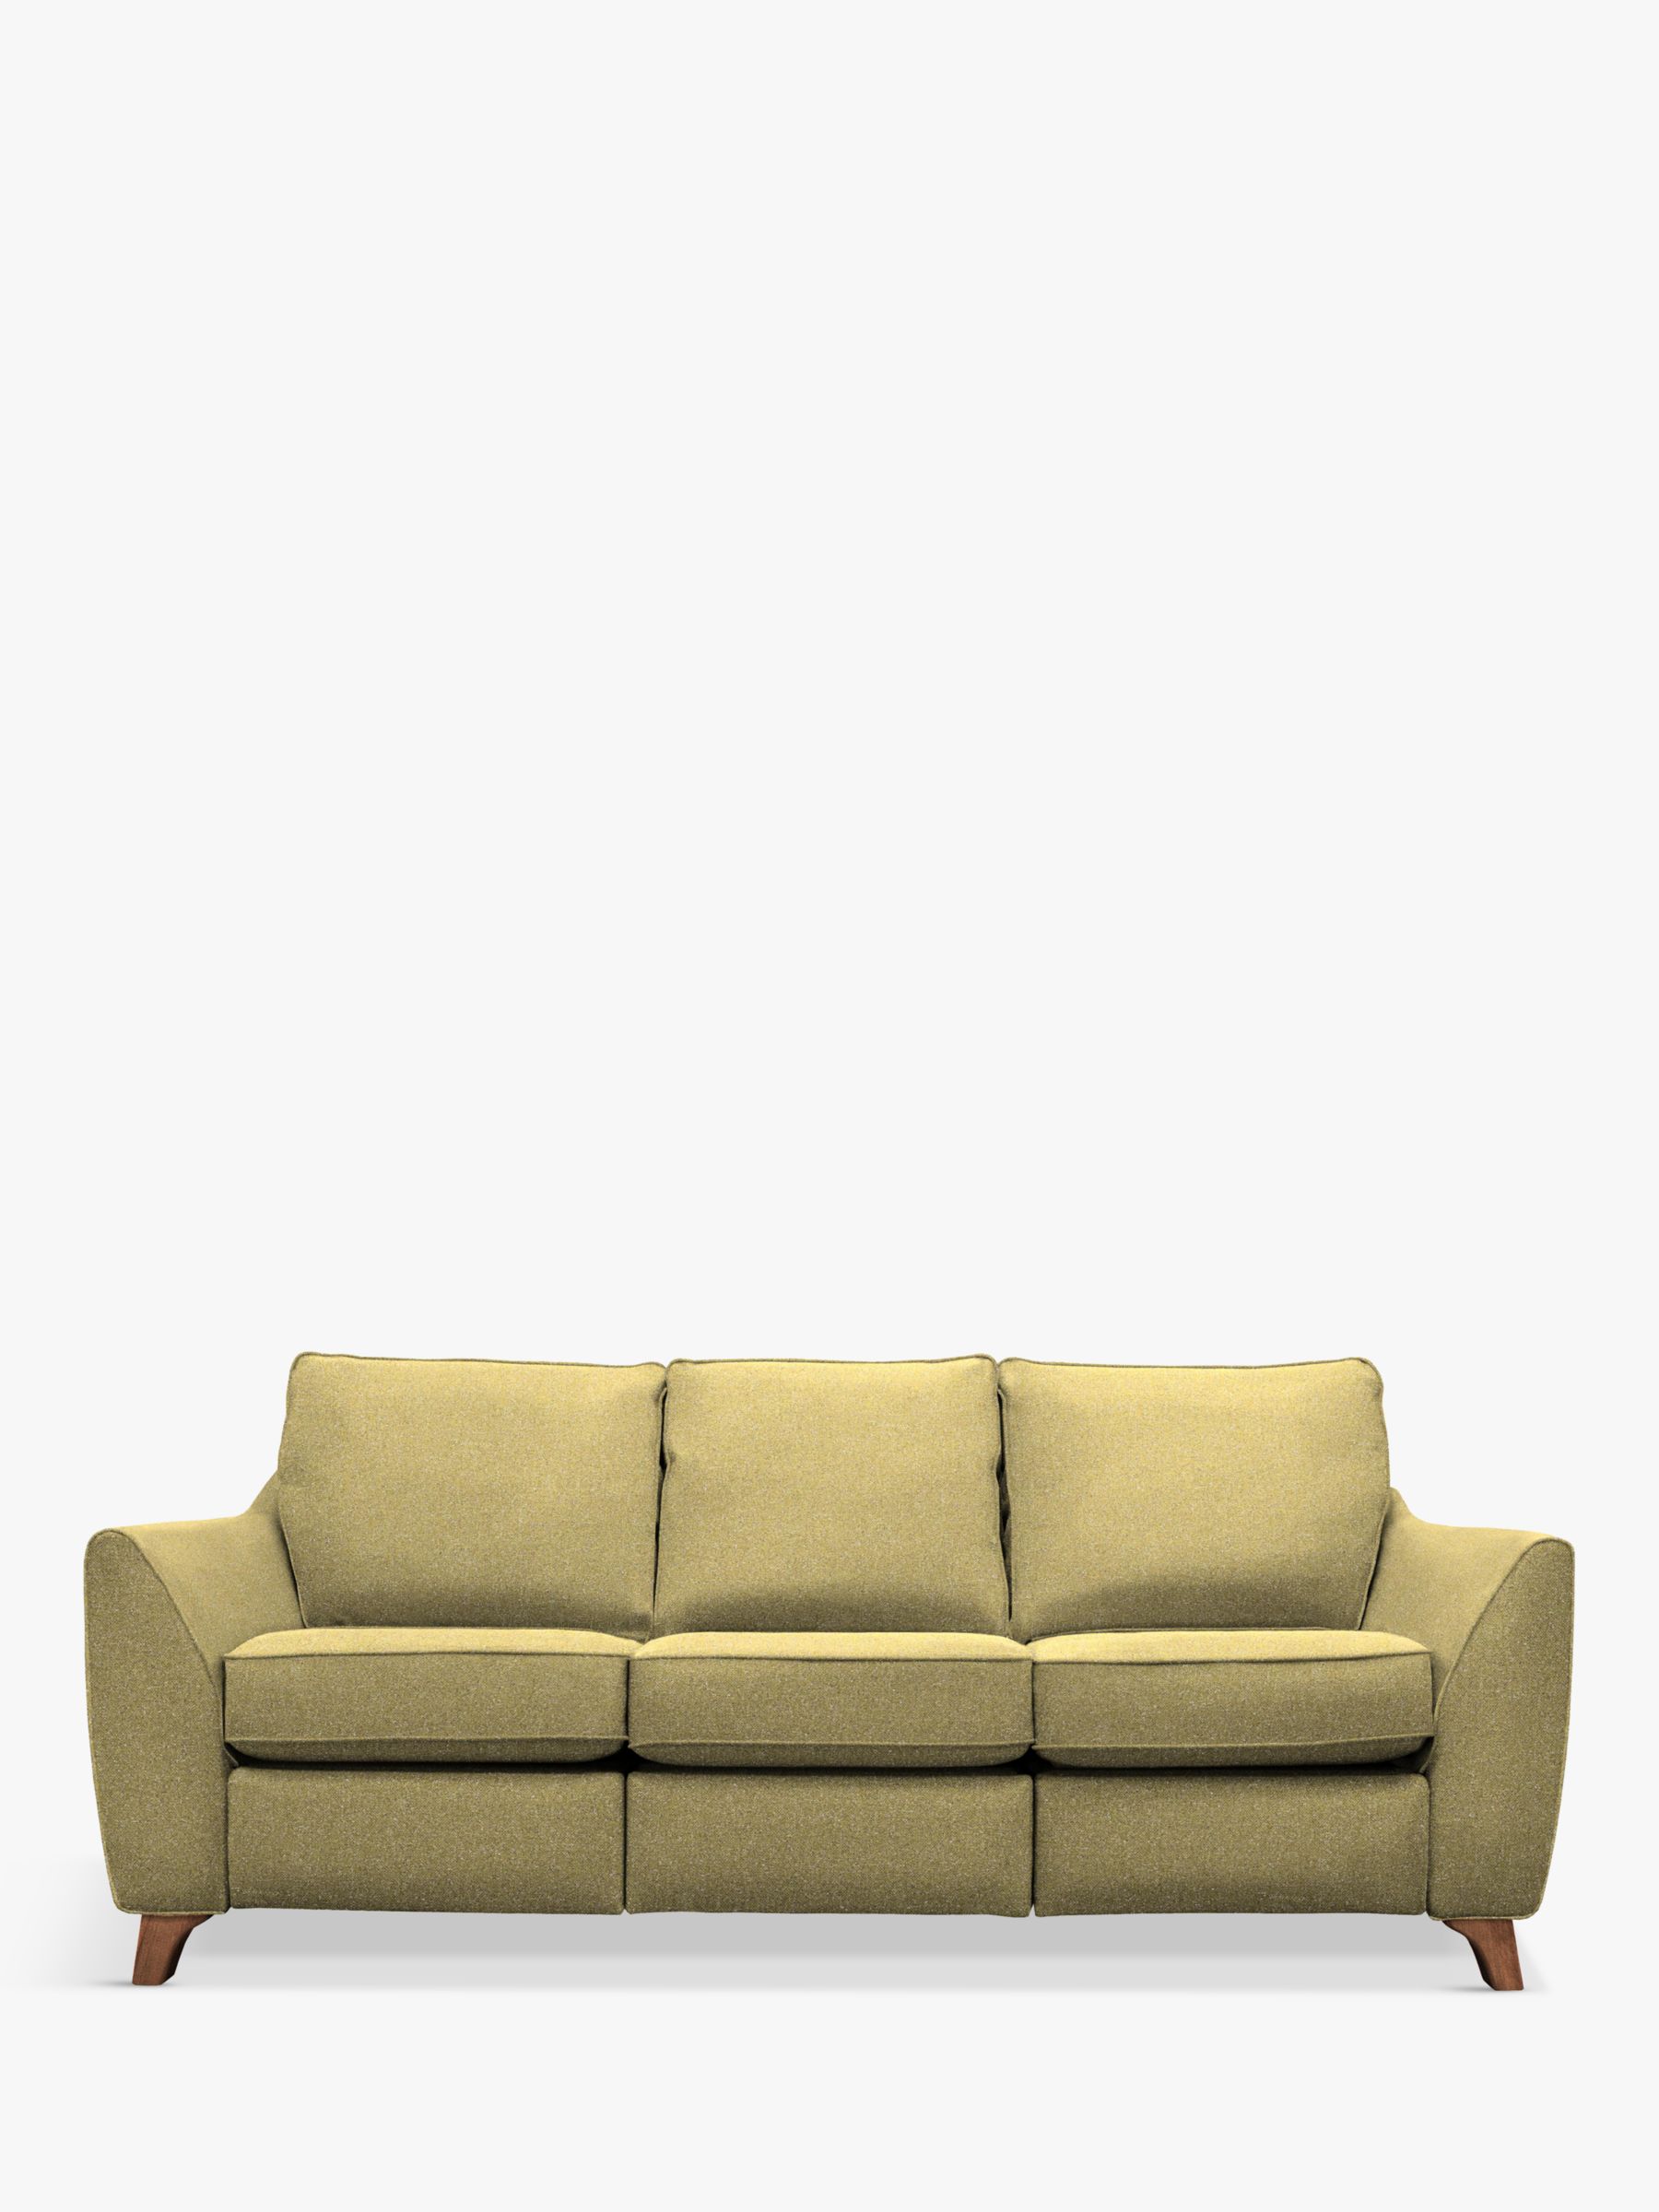 The Sixty Eight Range, G Plan Vintage The Sixty Eight Large 3 Seater Sofa, Tweed Citrus